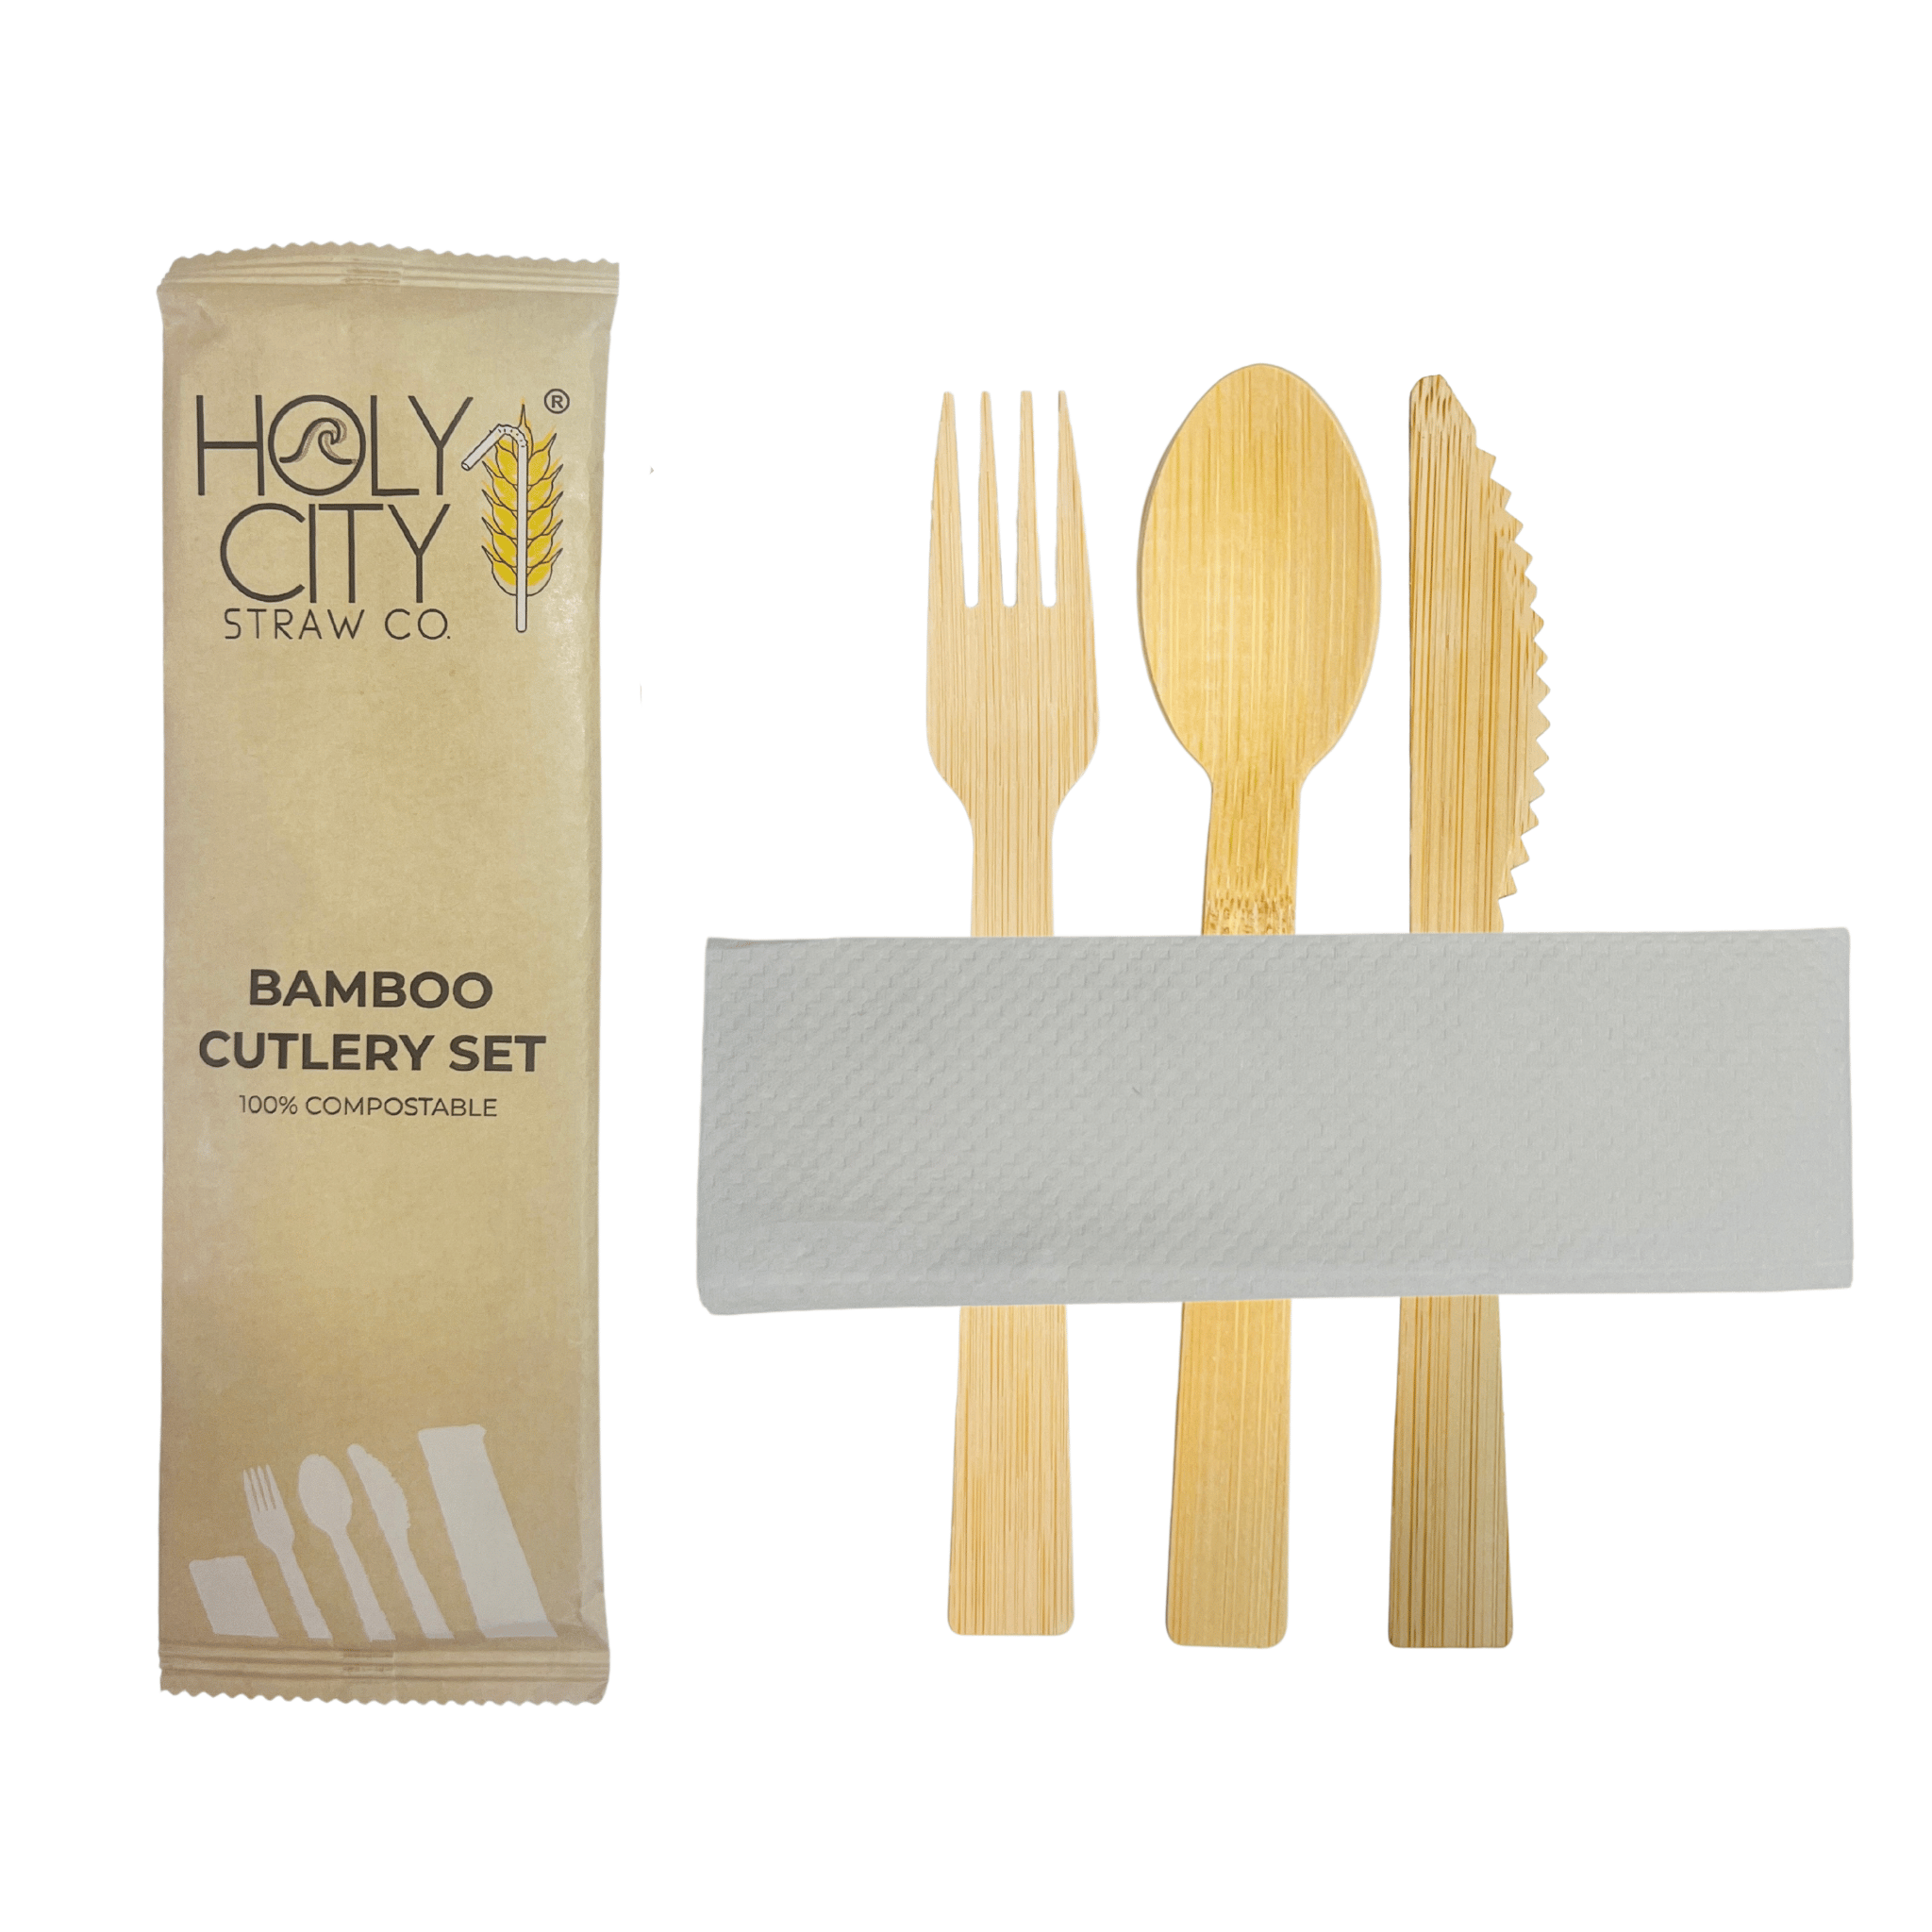 Bamboo Cutlery Set by Holy City Straw Co, 100% Compostable Wrapped Utensils, Eco-Friendly Disposable Fork, Knife, and Spoon with sideways Napkin